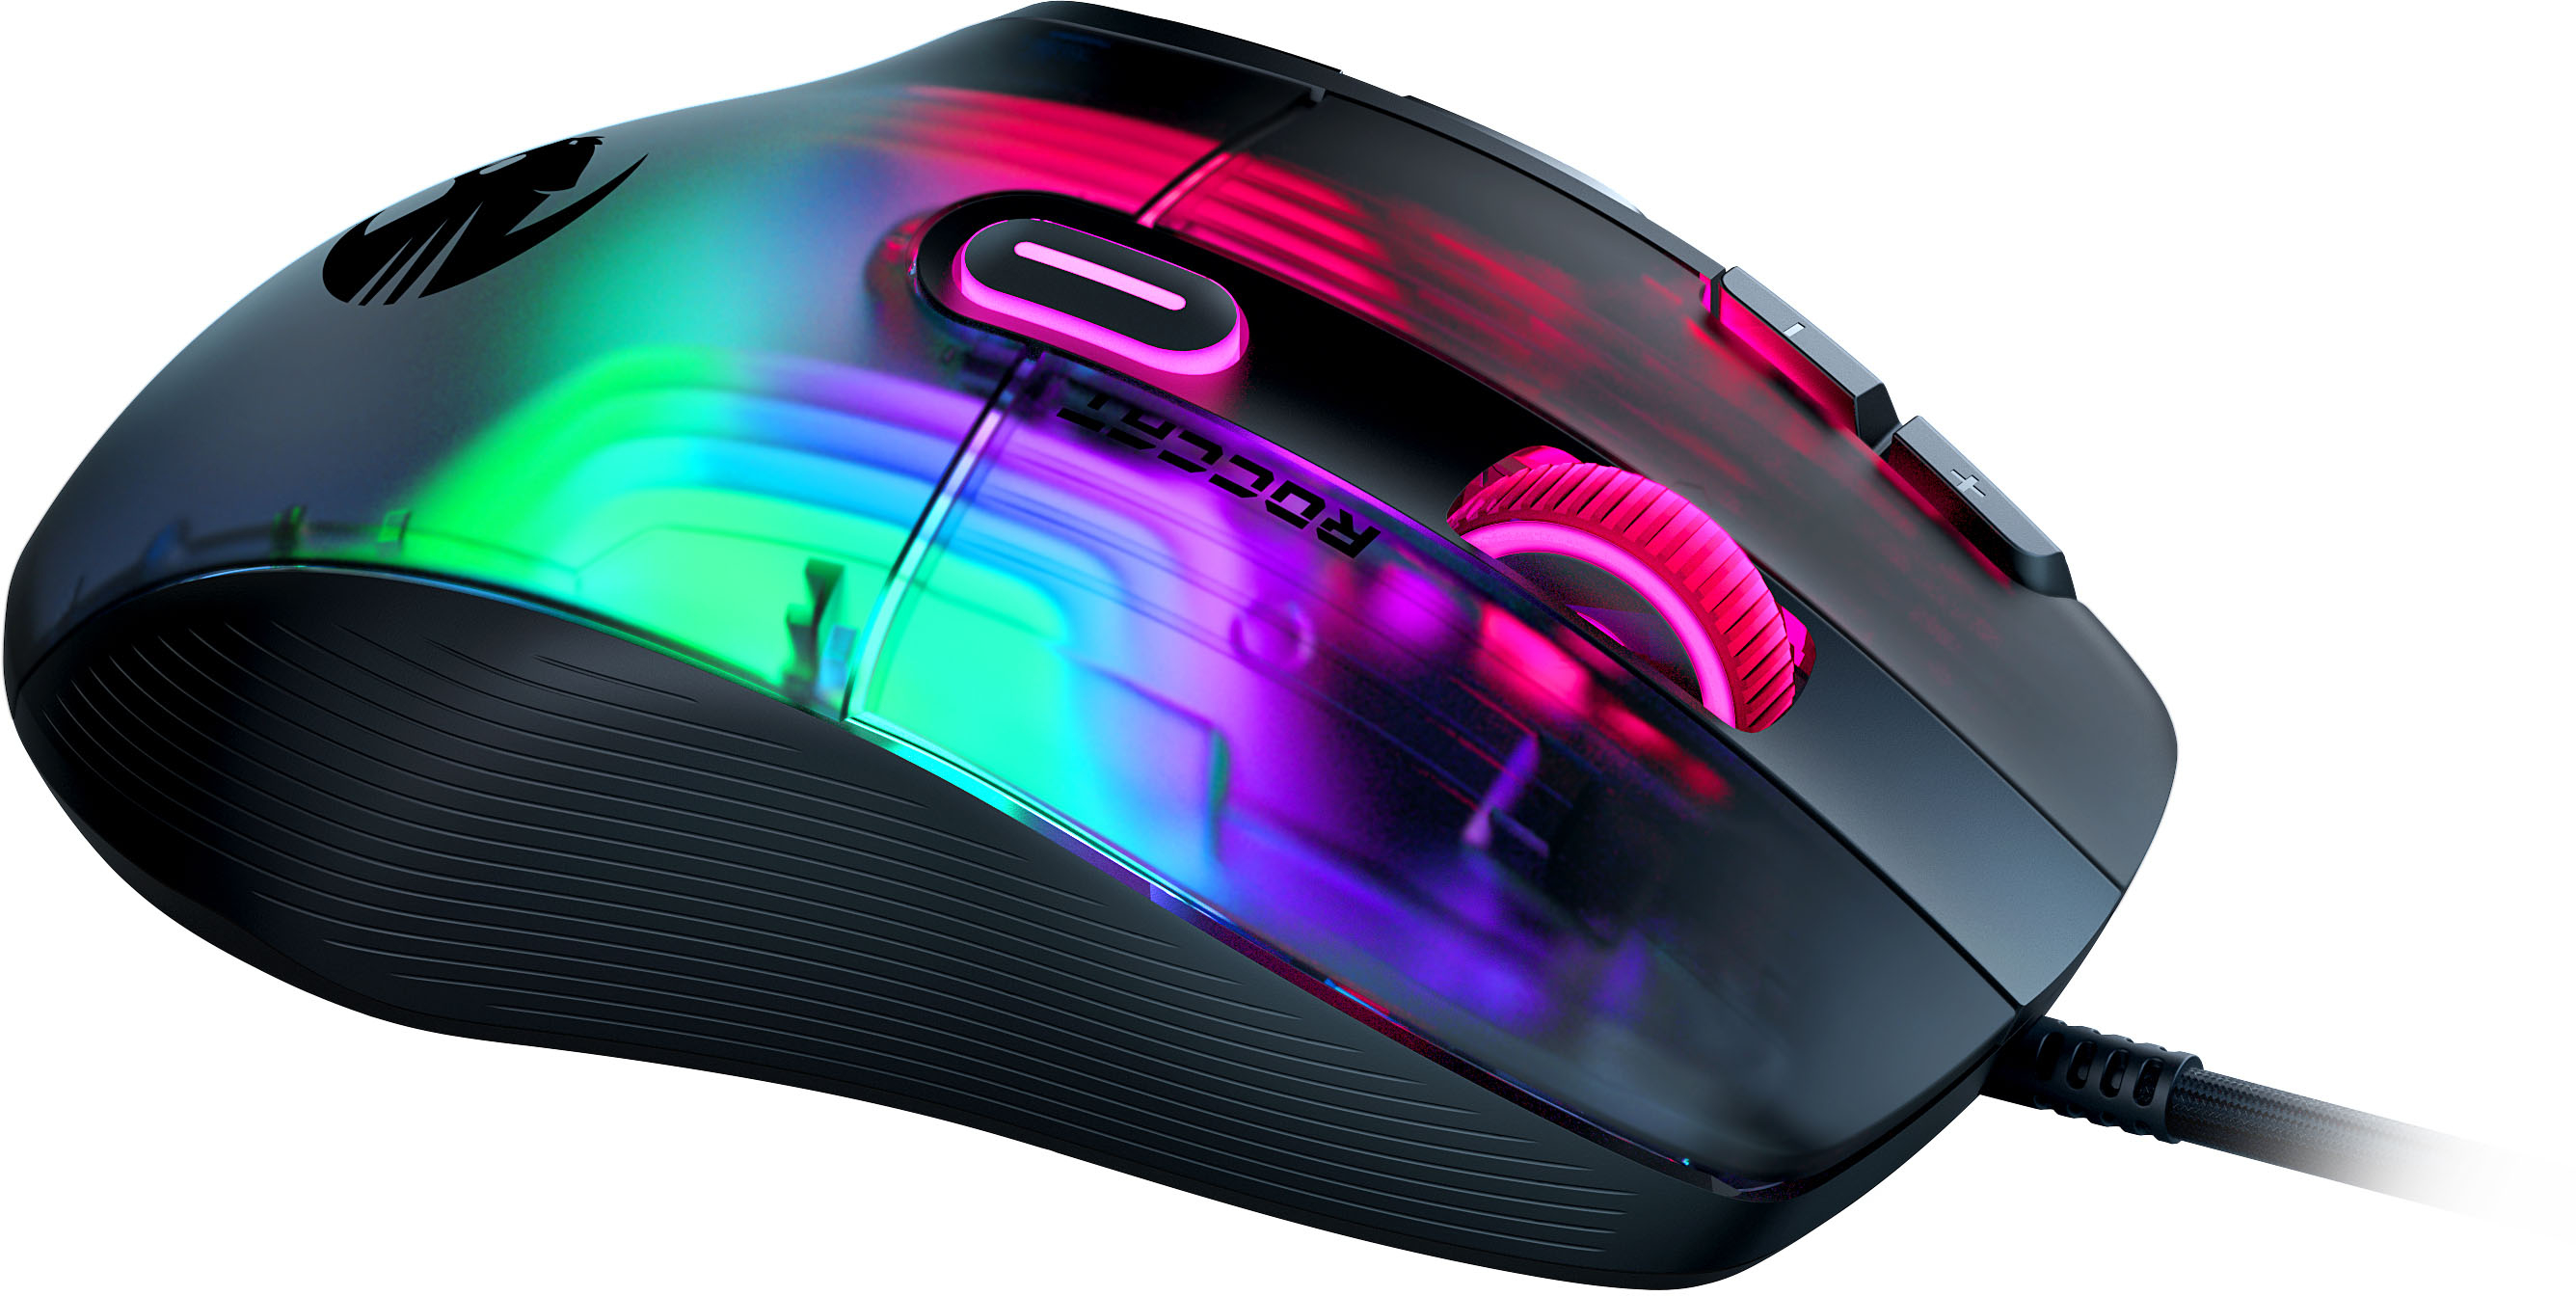 ROCCAT Kone XP Wired Gaming Buy Black Ambidextrous with multi-button Best AIMO - ROC-11-420-01 design RGB & Mouse lighting Optical